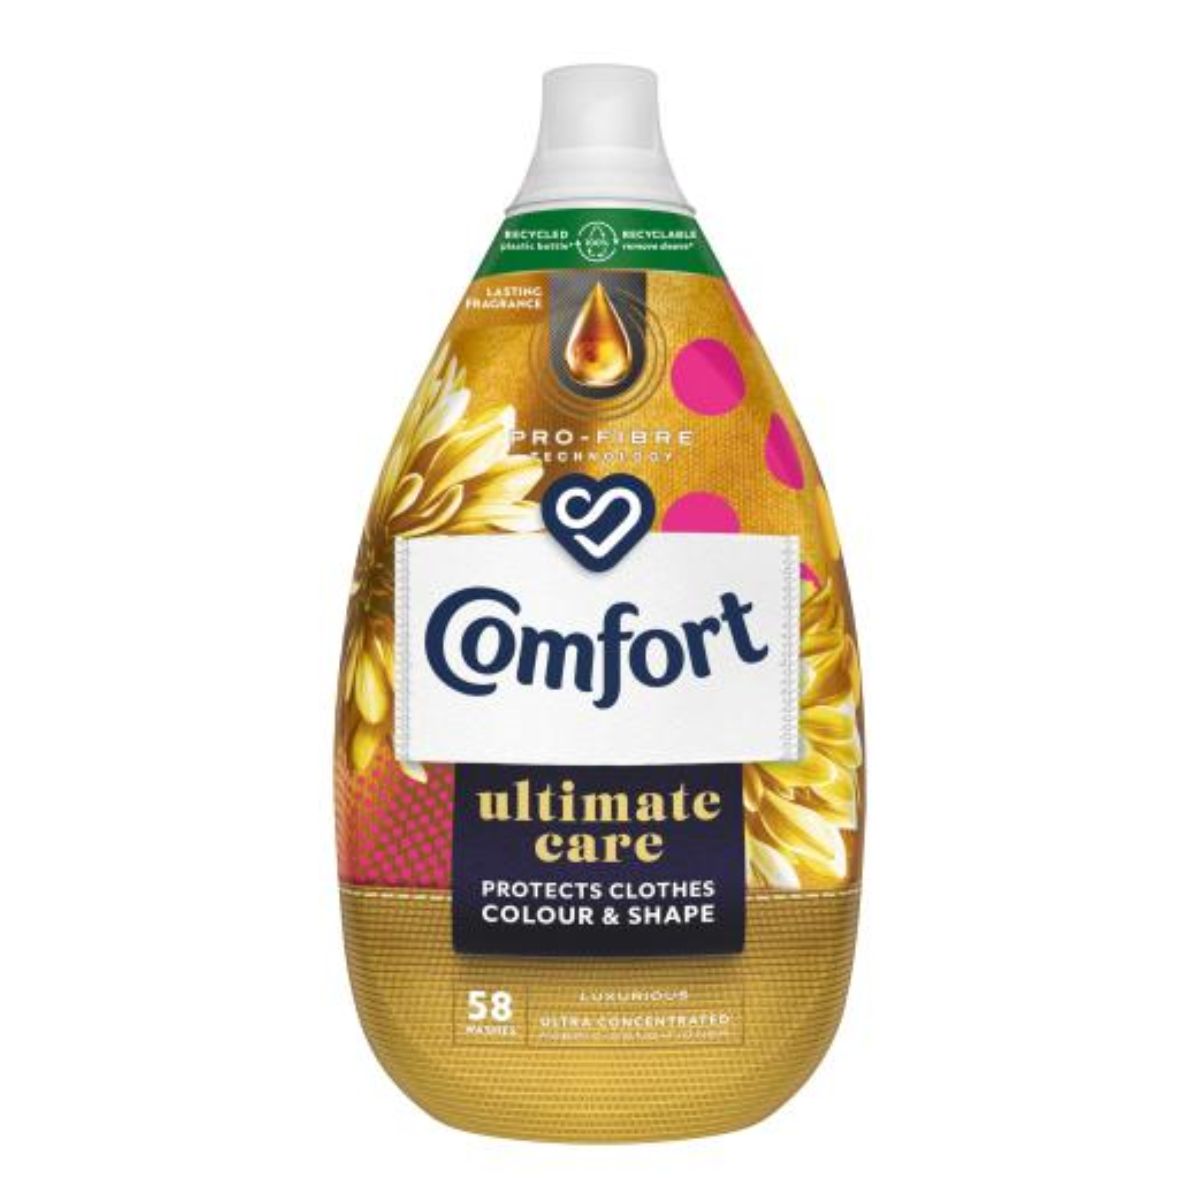 Comfort - Ultra-Concentrated Fabric Conditioner Ultimate Care Luxurious 58 Wash - 870ml ultimate care liquid laundry detergent.